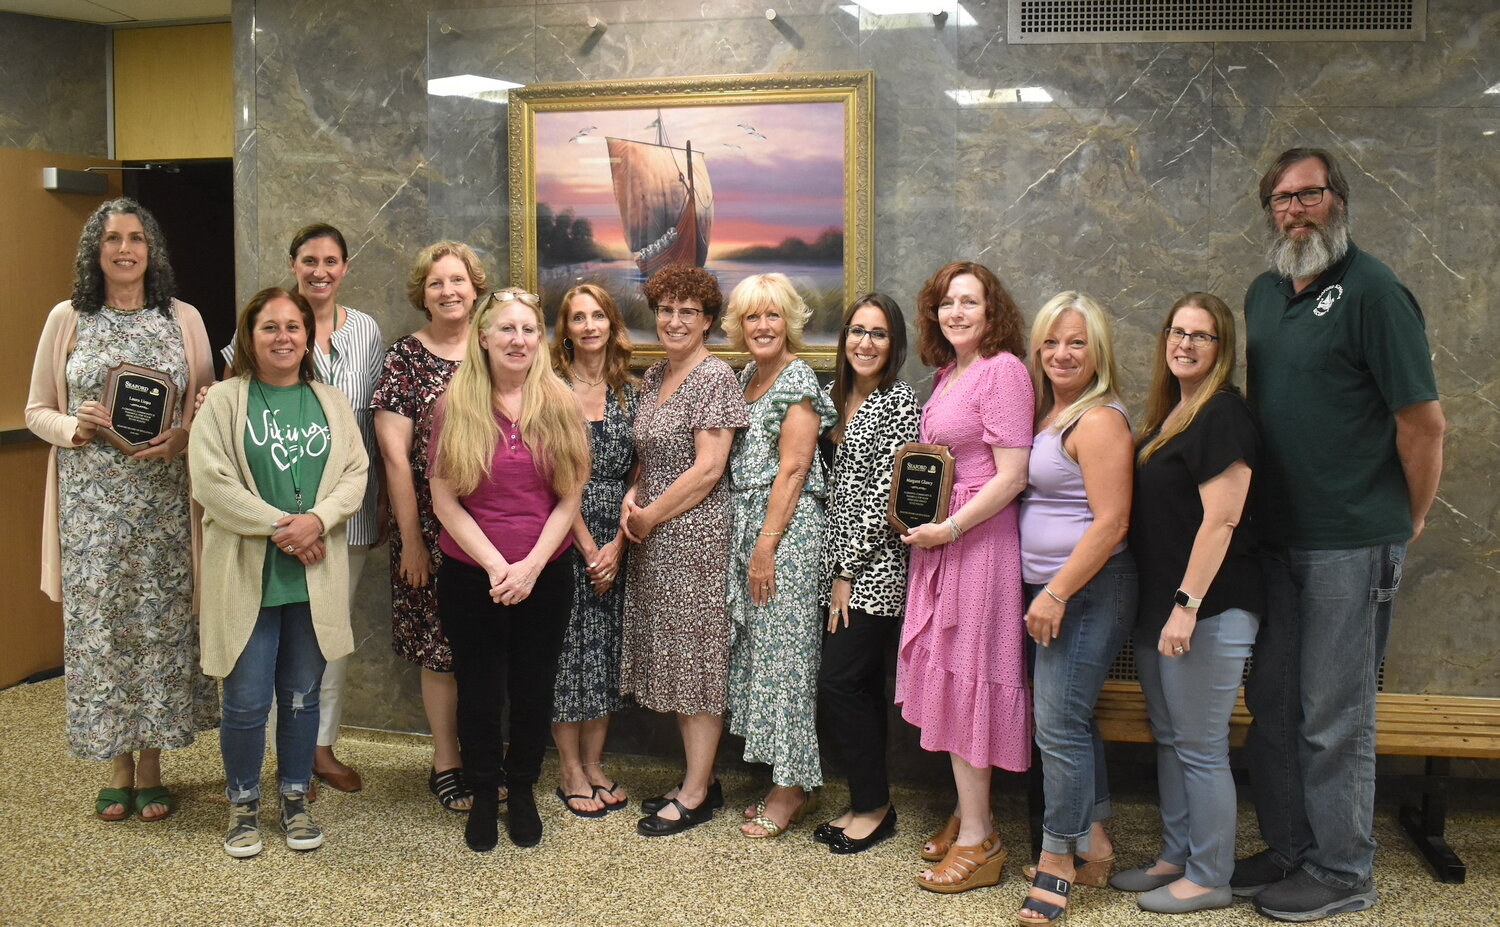 The Seaford Board of Education honored retiring teachers and staff members at the June 21 meeting.